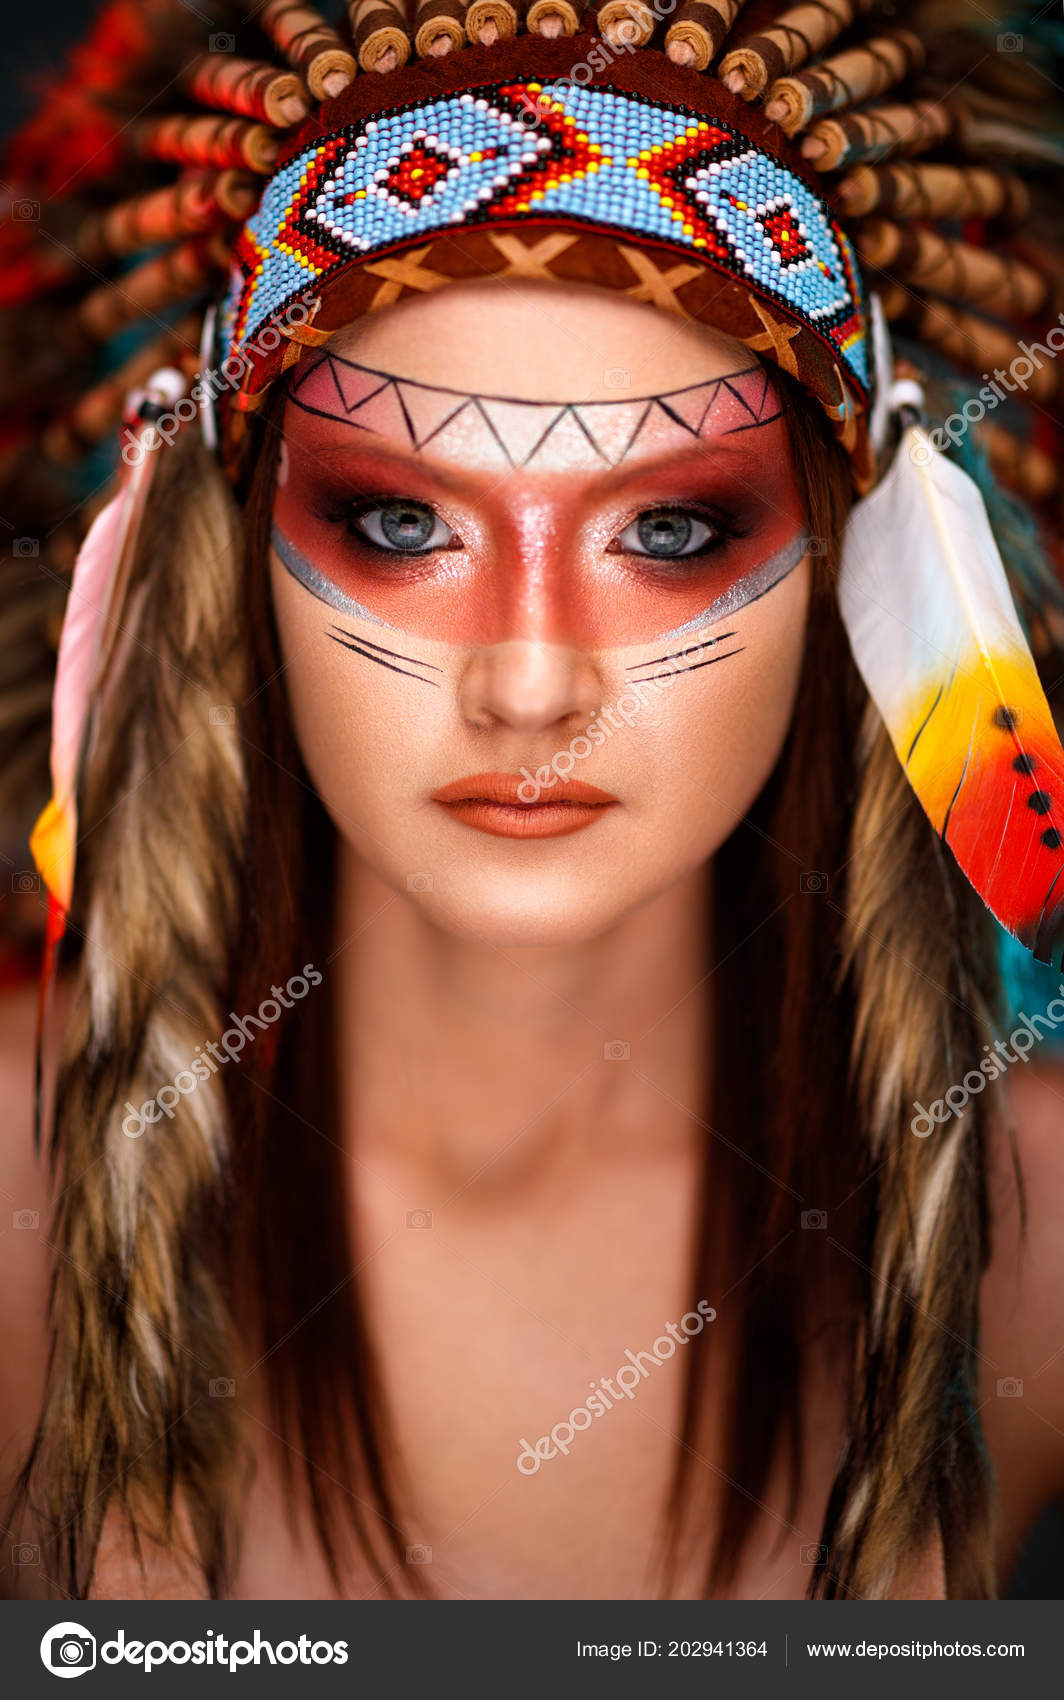 Indian face painting designs | Native Indian American Headdress Face